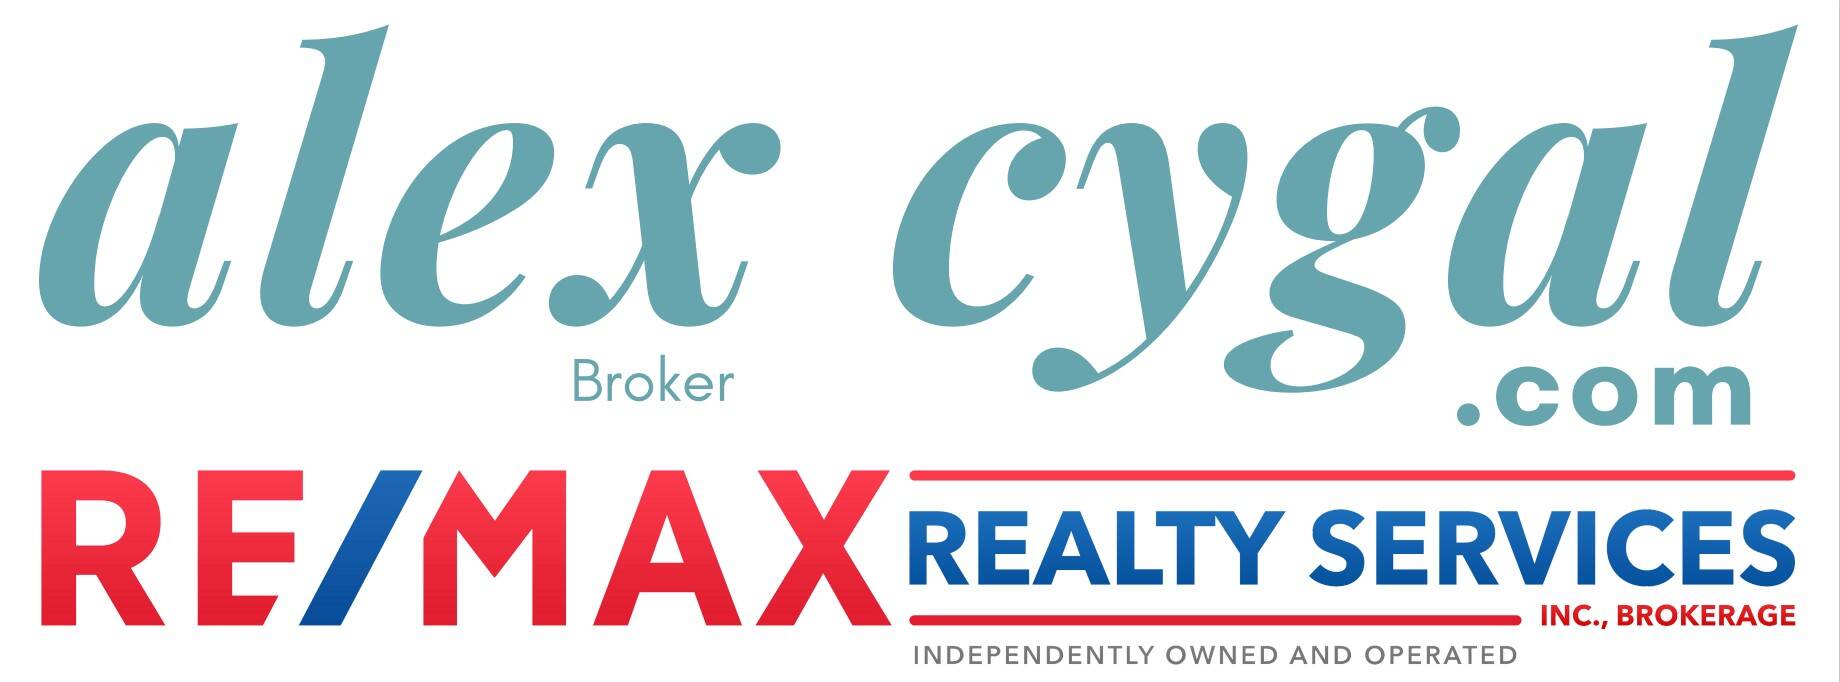 Alex Cygal Realty Services